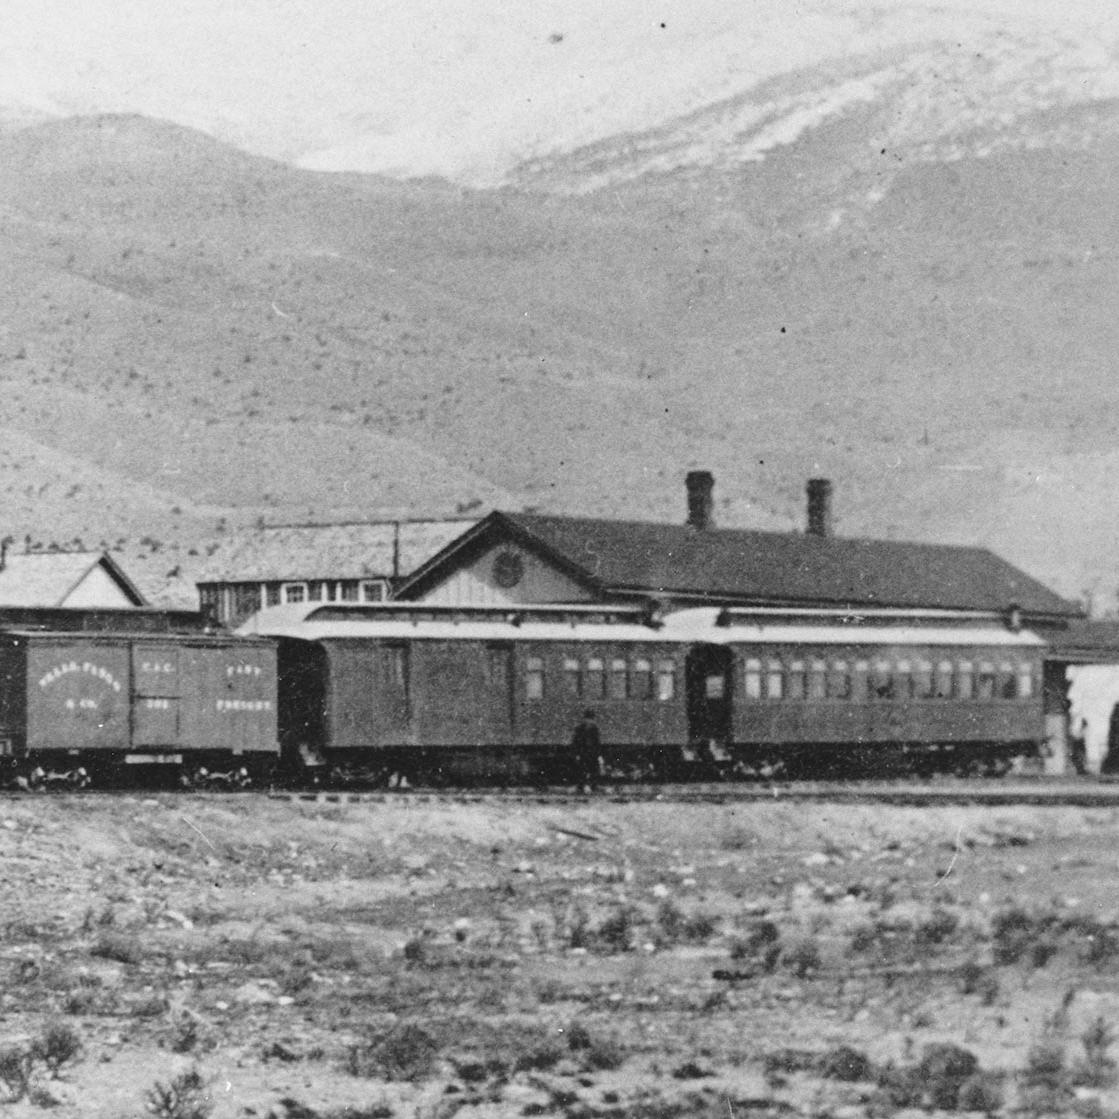 Train at Mound House ca. 1888